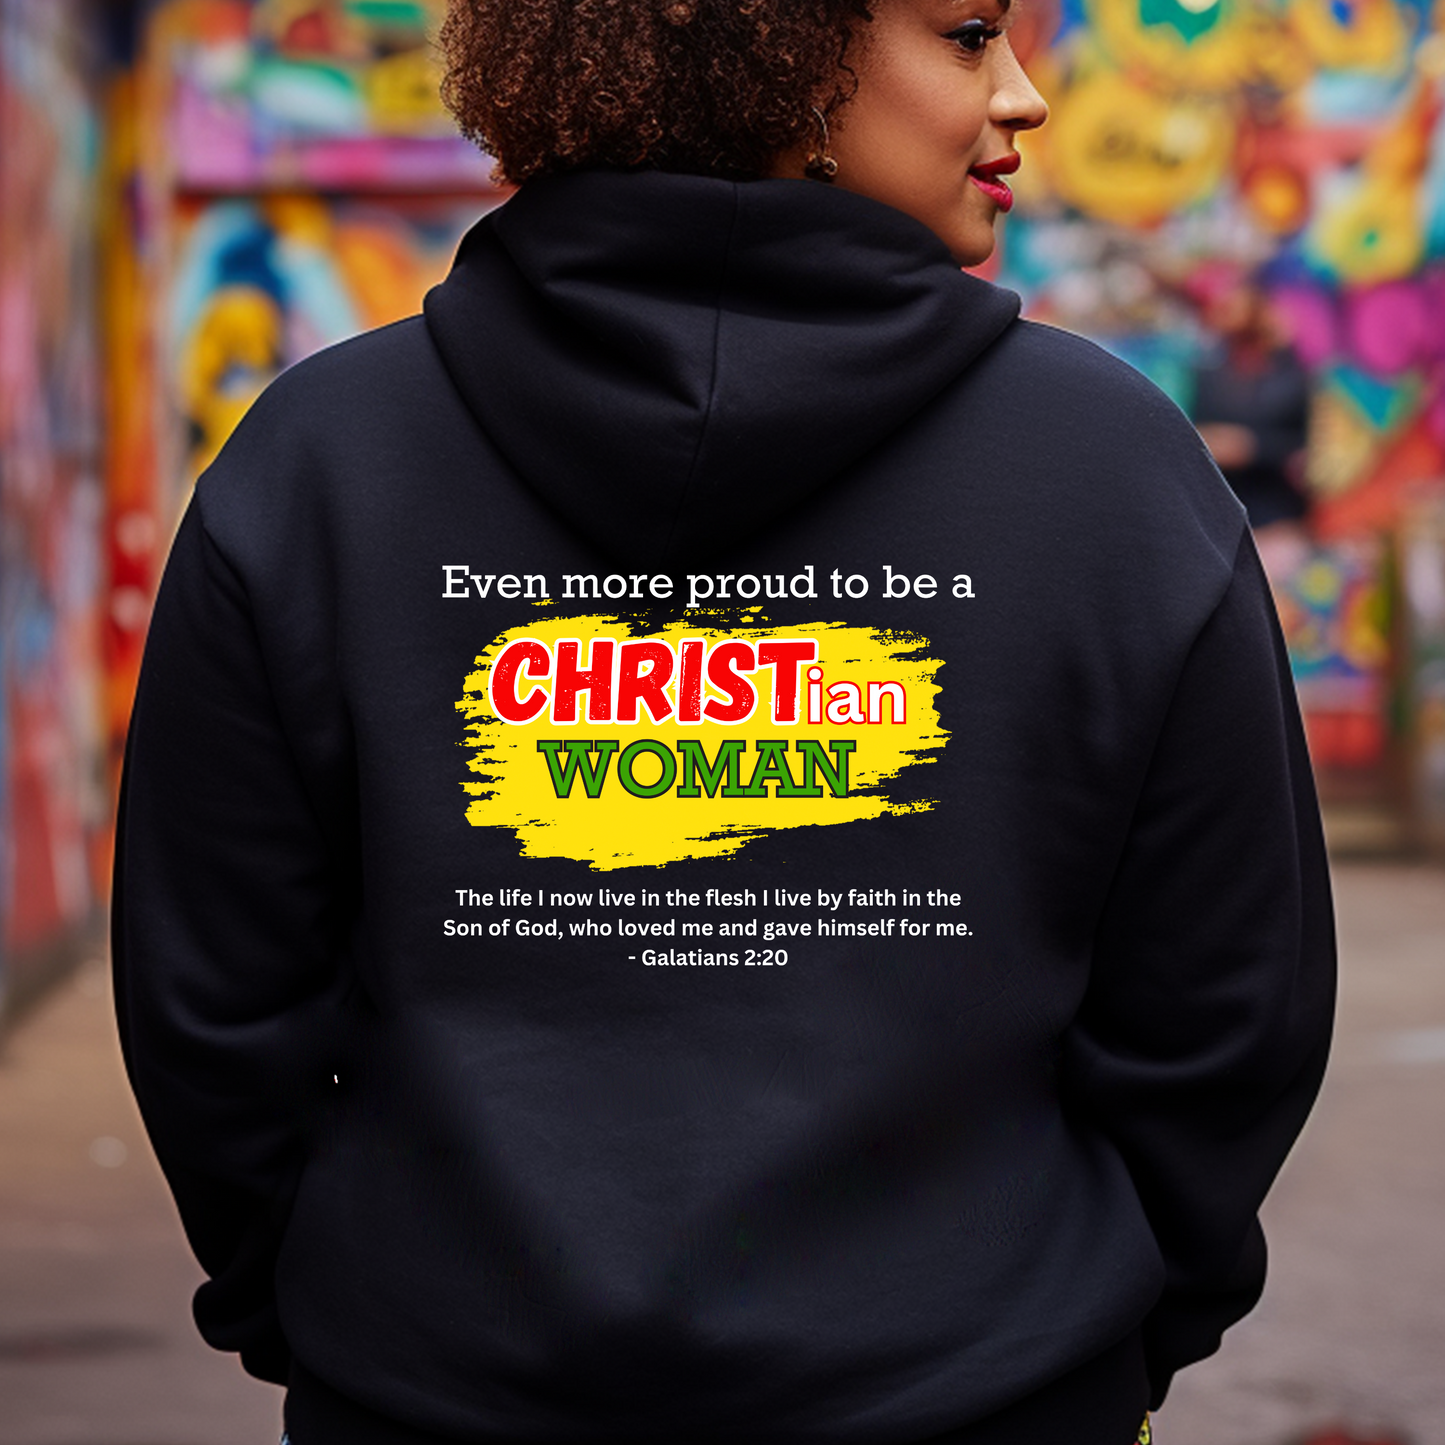 Black Christian Woman Hoodie in Black - Embrace Black History with Triumph Tees. Featuring empowering designs for women. Shop now for stylish Christian clothing!